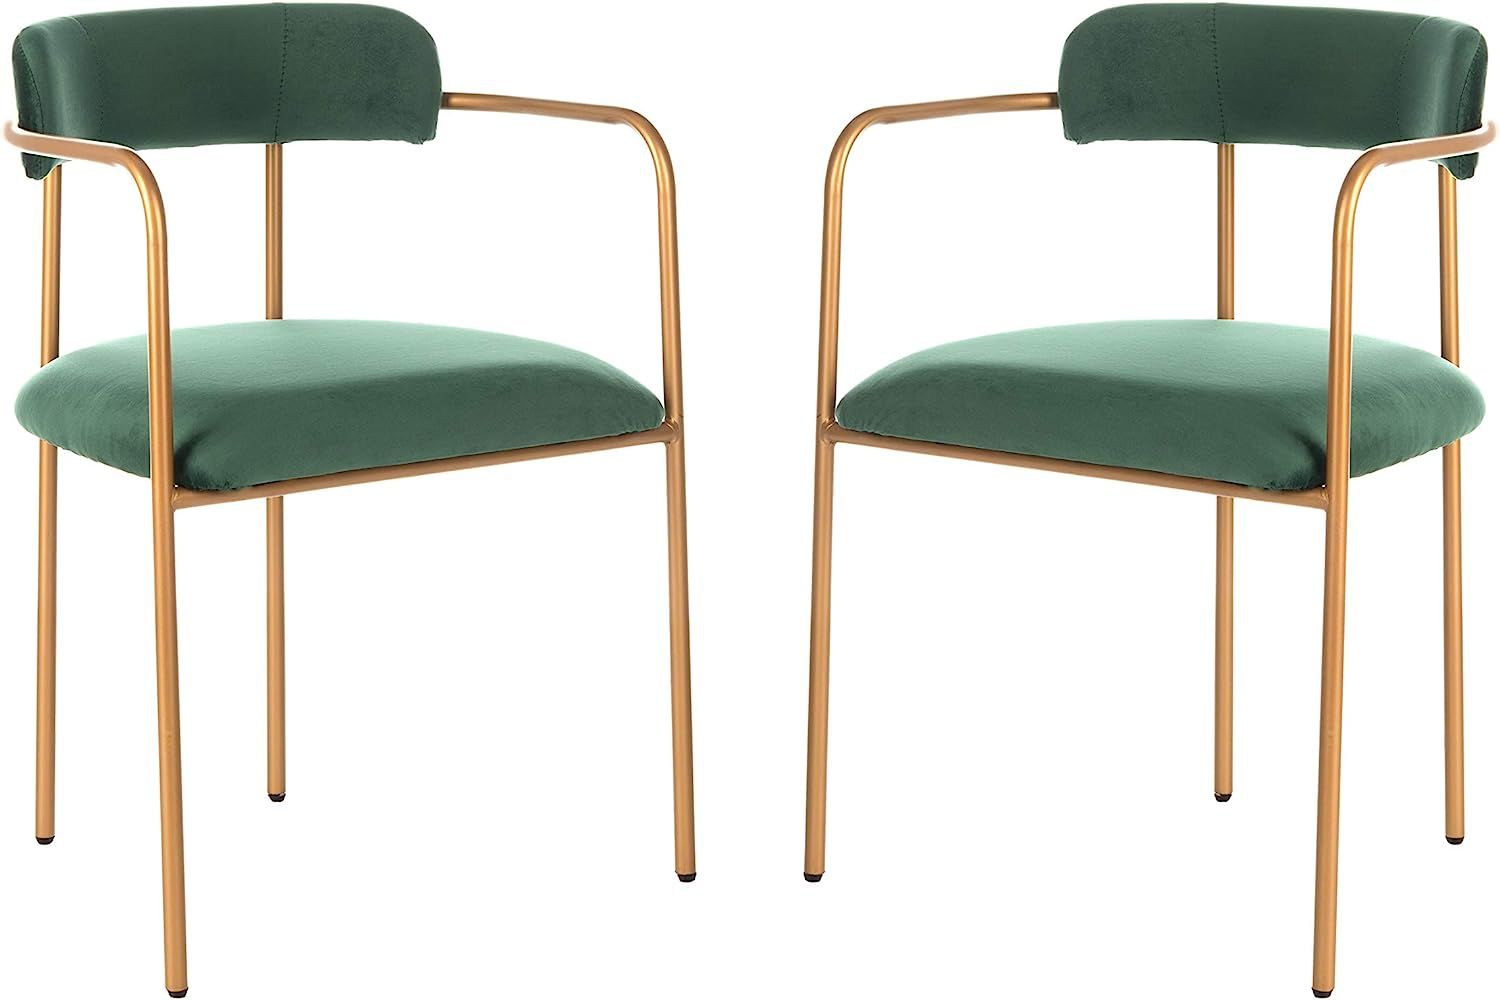 Safavieh Home Camille Malachite Green Velvet and Gold Low Back Side Chair, Set of 2 | Amazon (US)